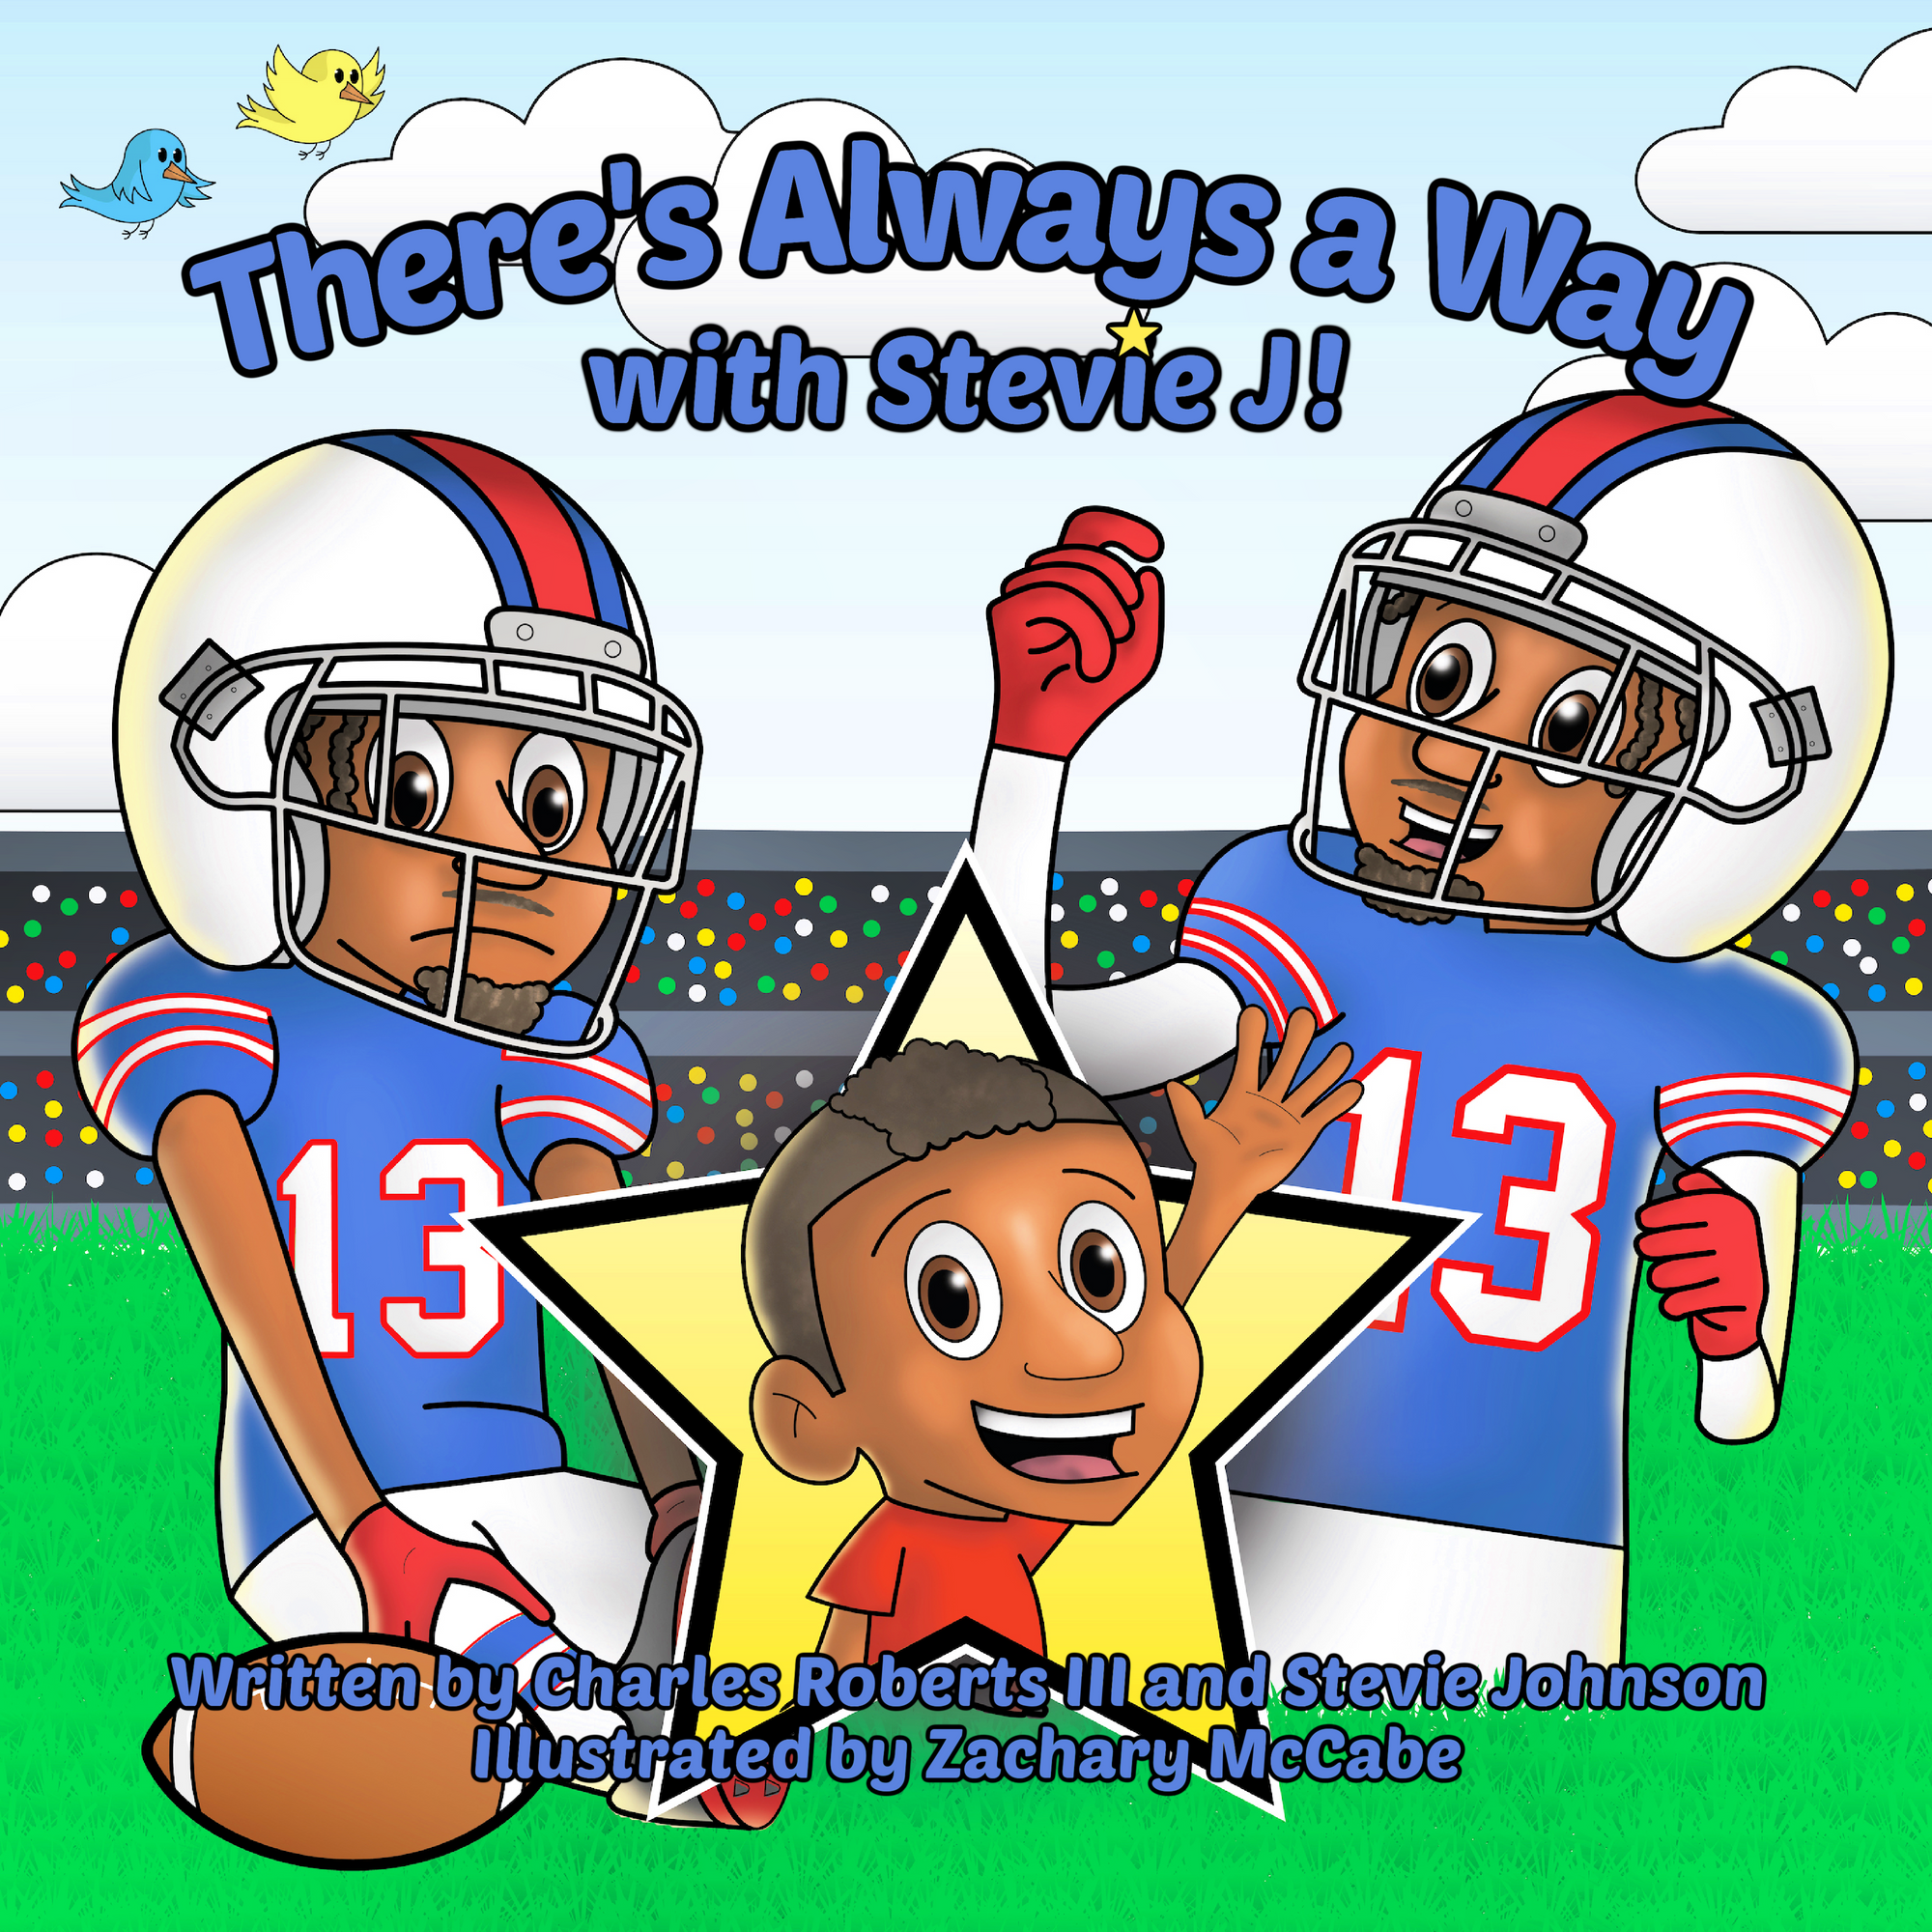 *There's Always a Way with Stevie J